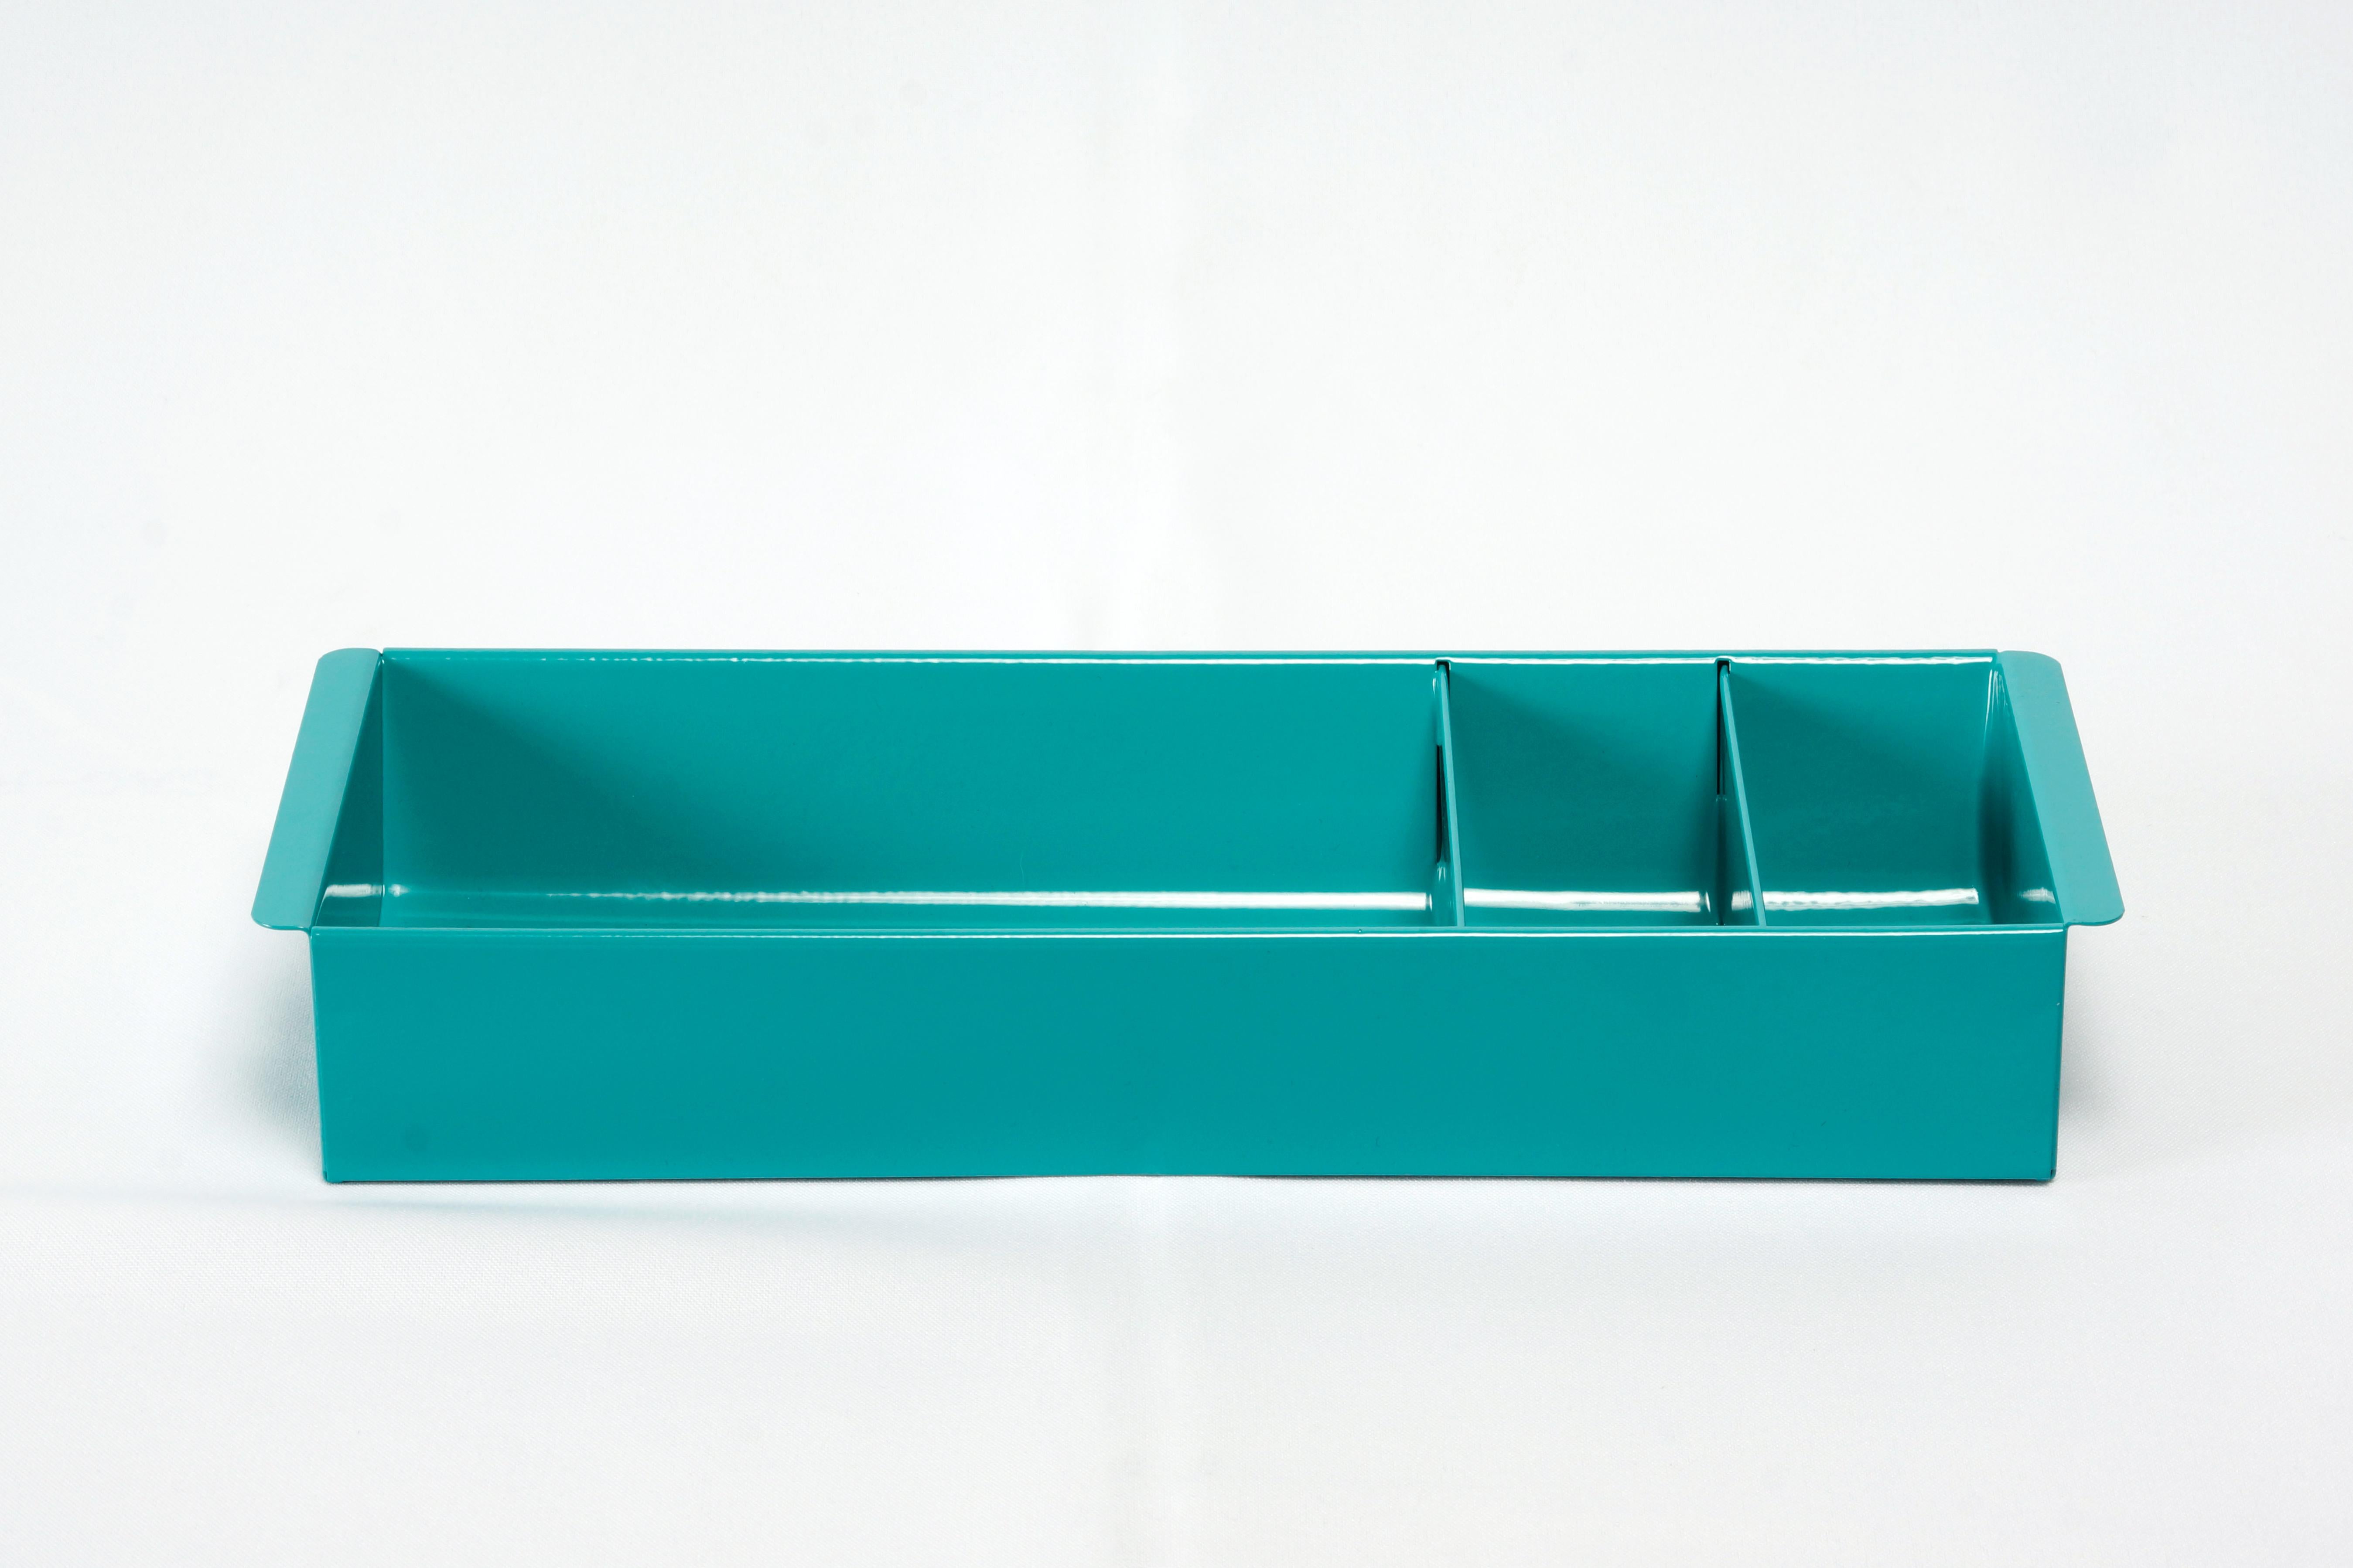 American Steel Tanker Drawer Insert Repurposed as Organizer, Refinished in Turquoise